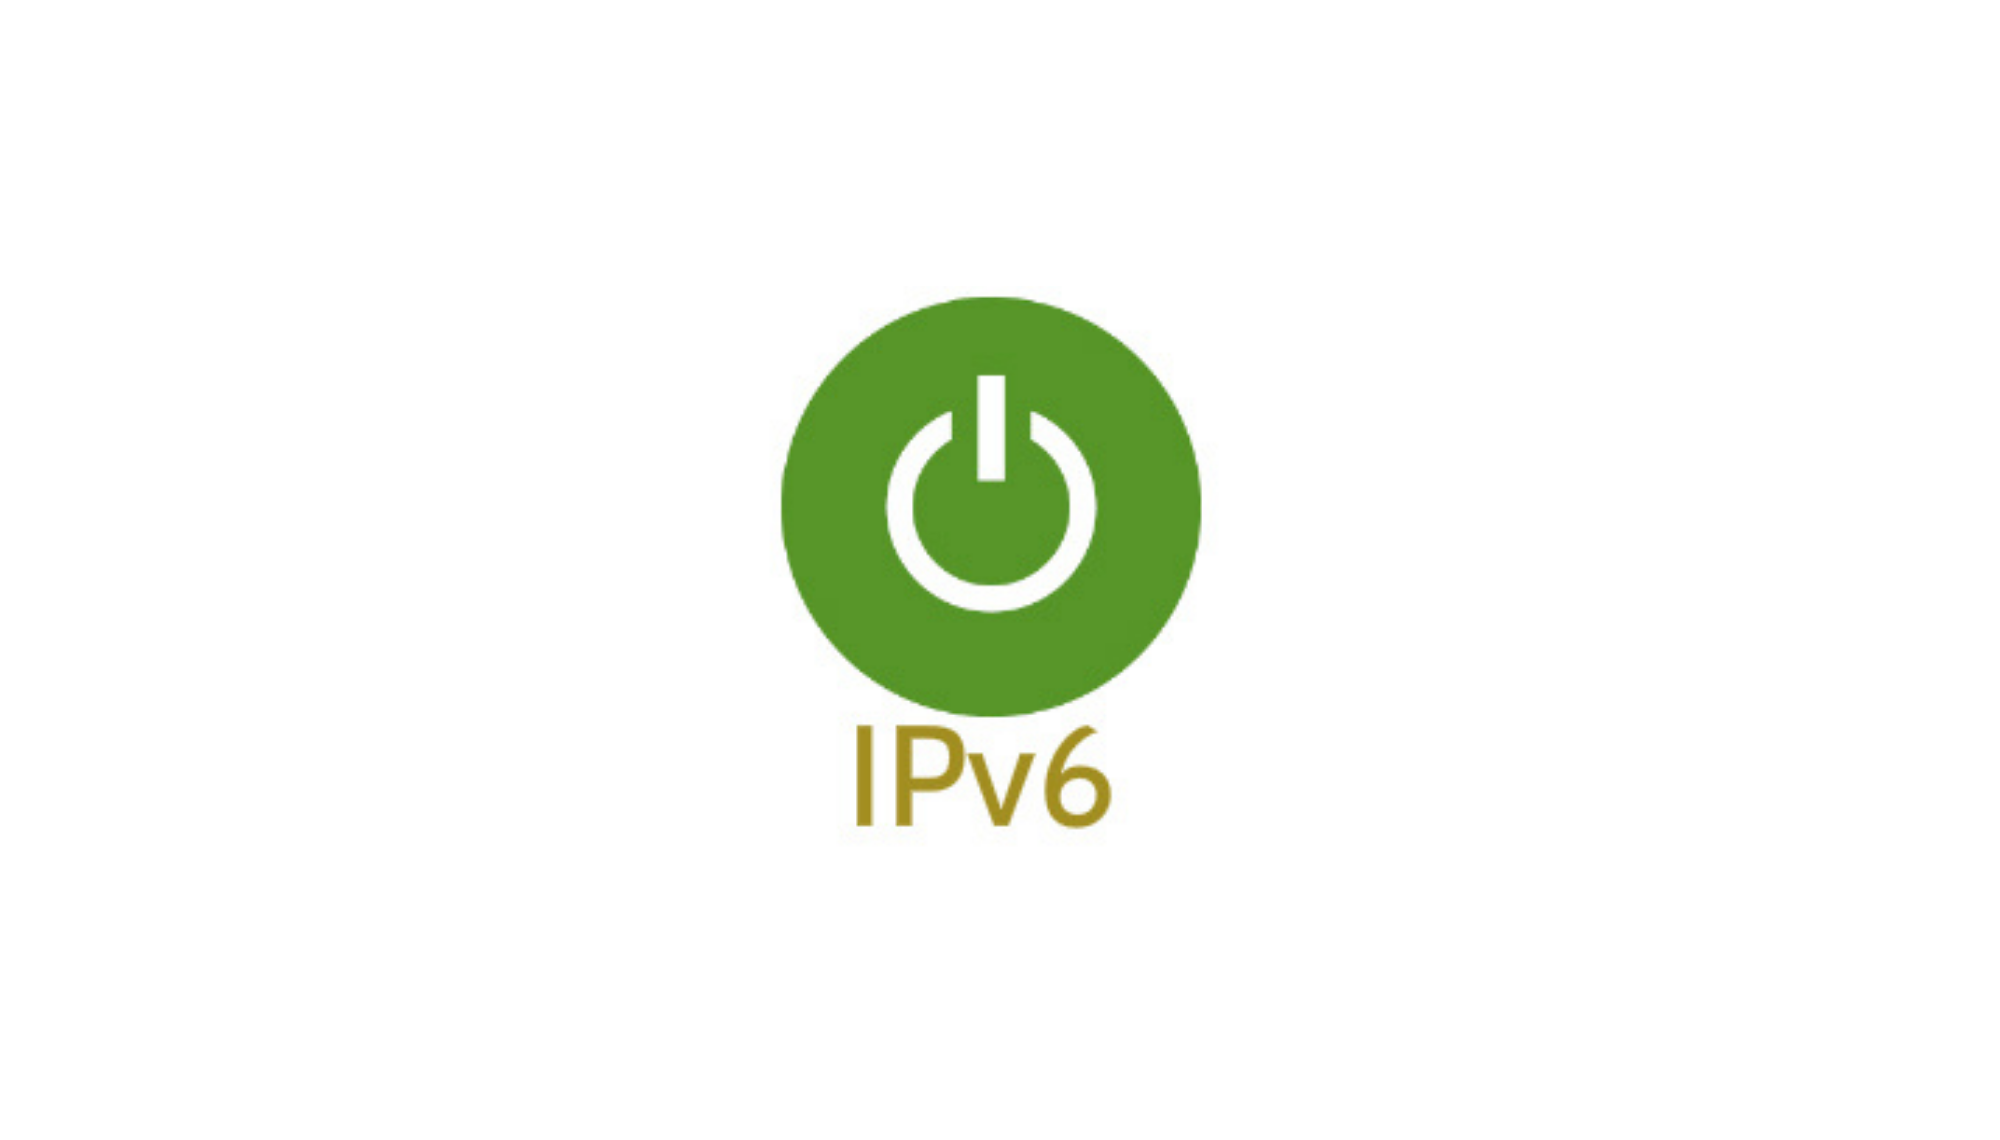 You probably have IPv6. Turn it on!